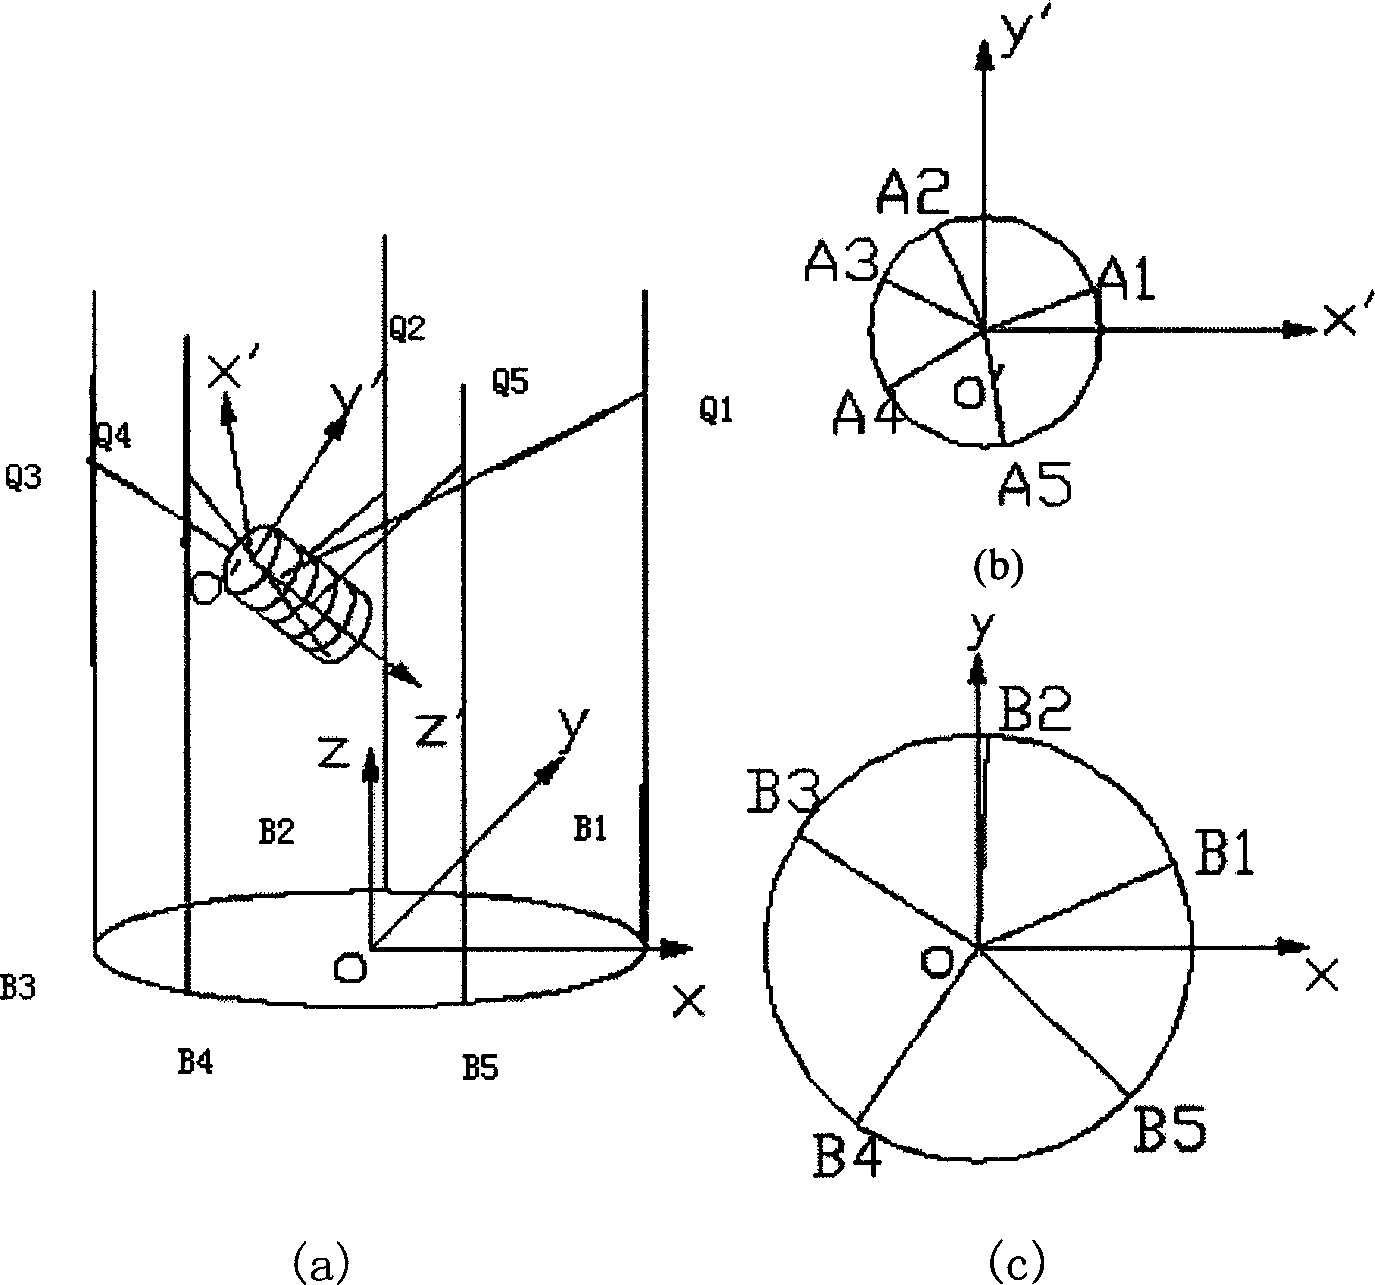 Reverse resolving mathematical algorithm for five shaft five ring parallel moving mechanism moving control